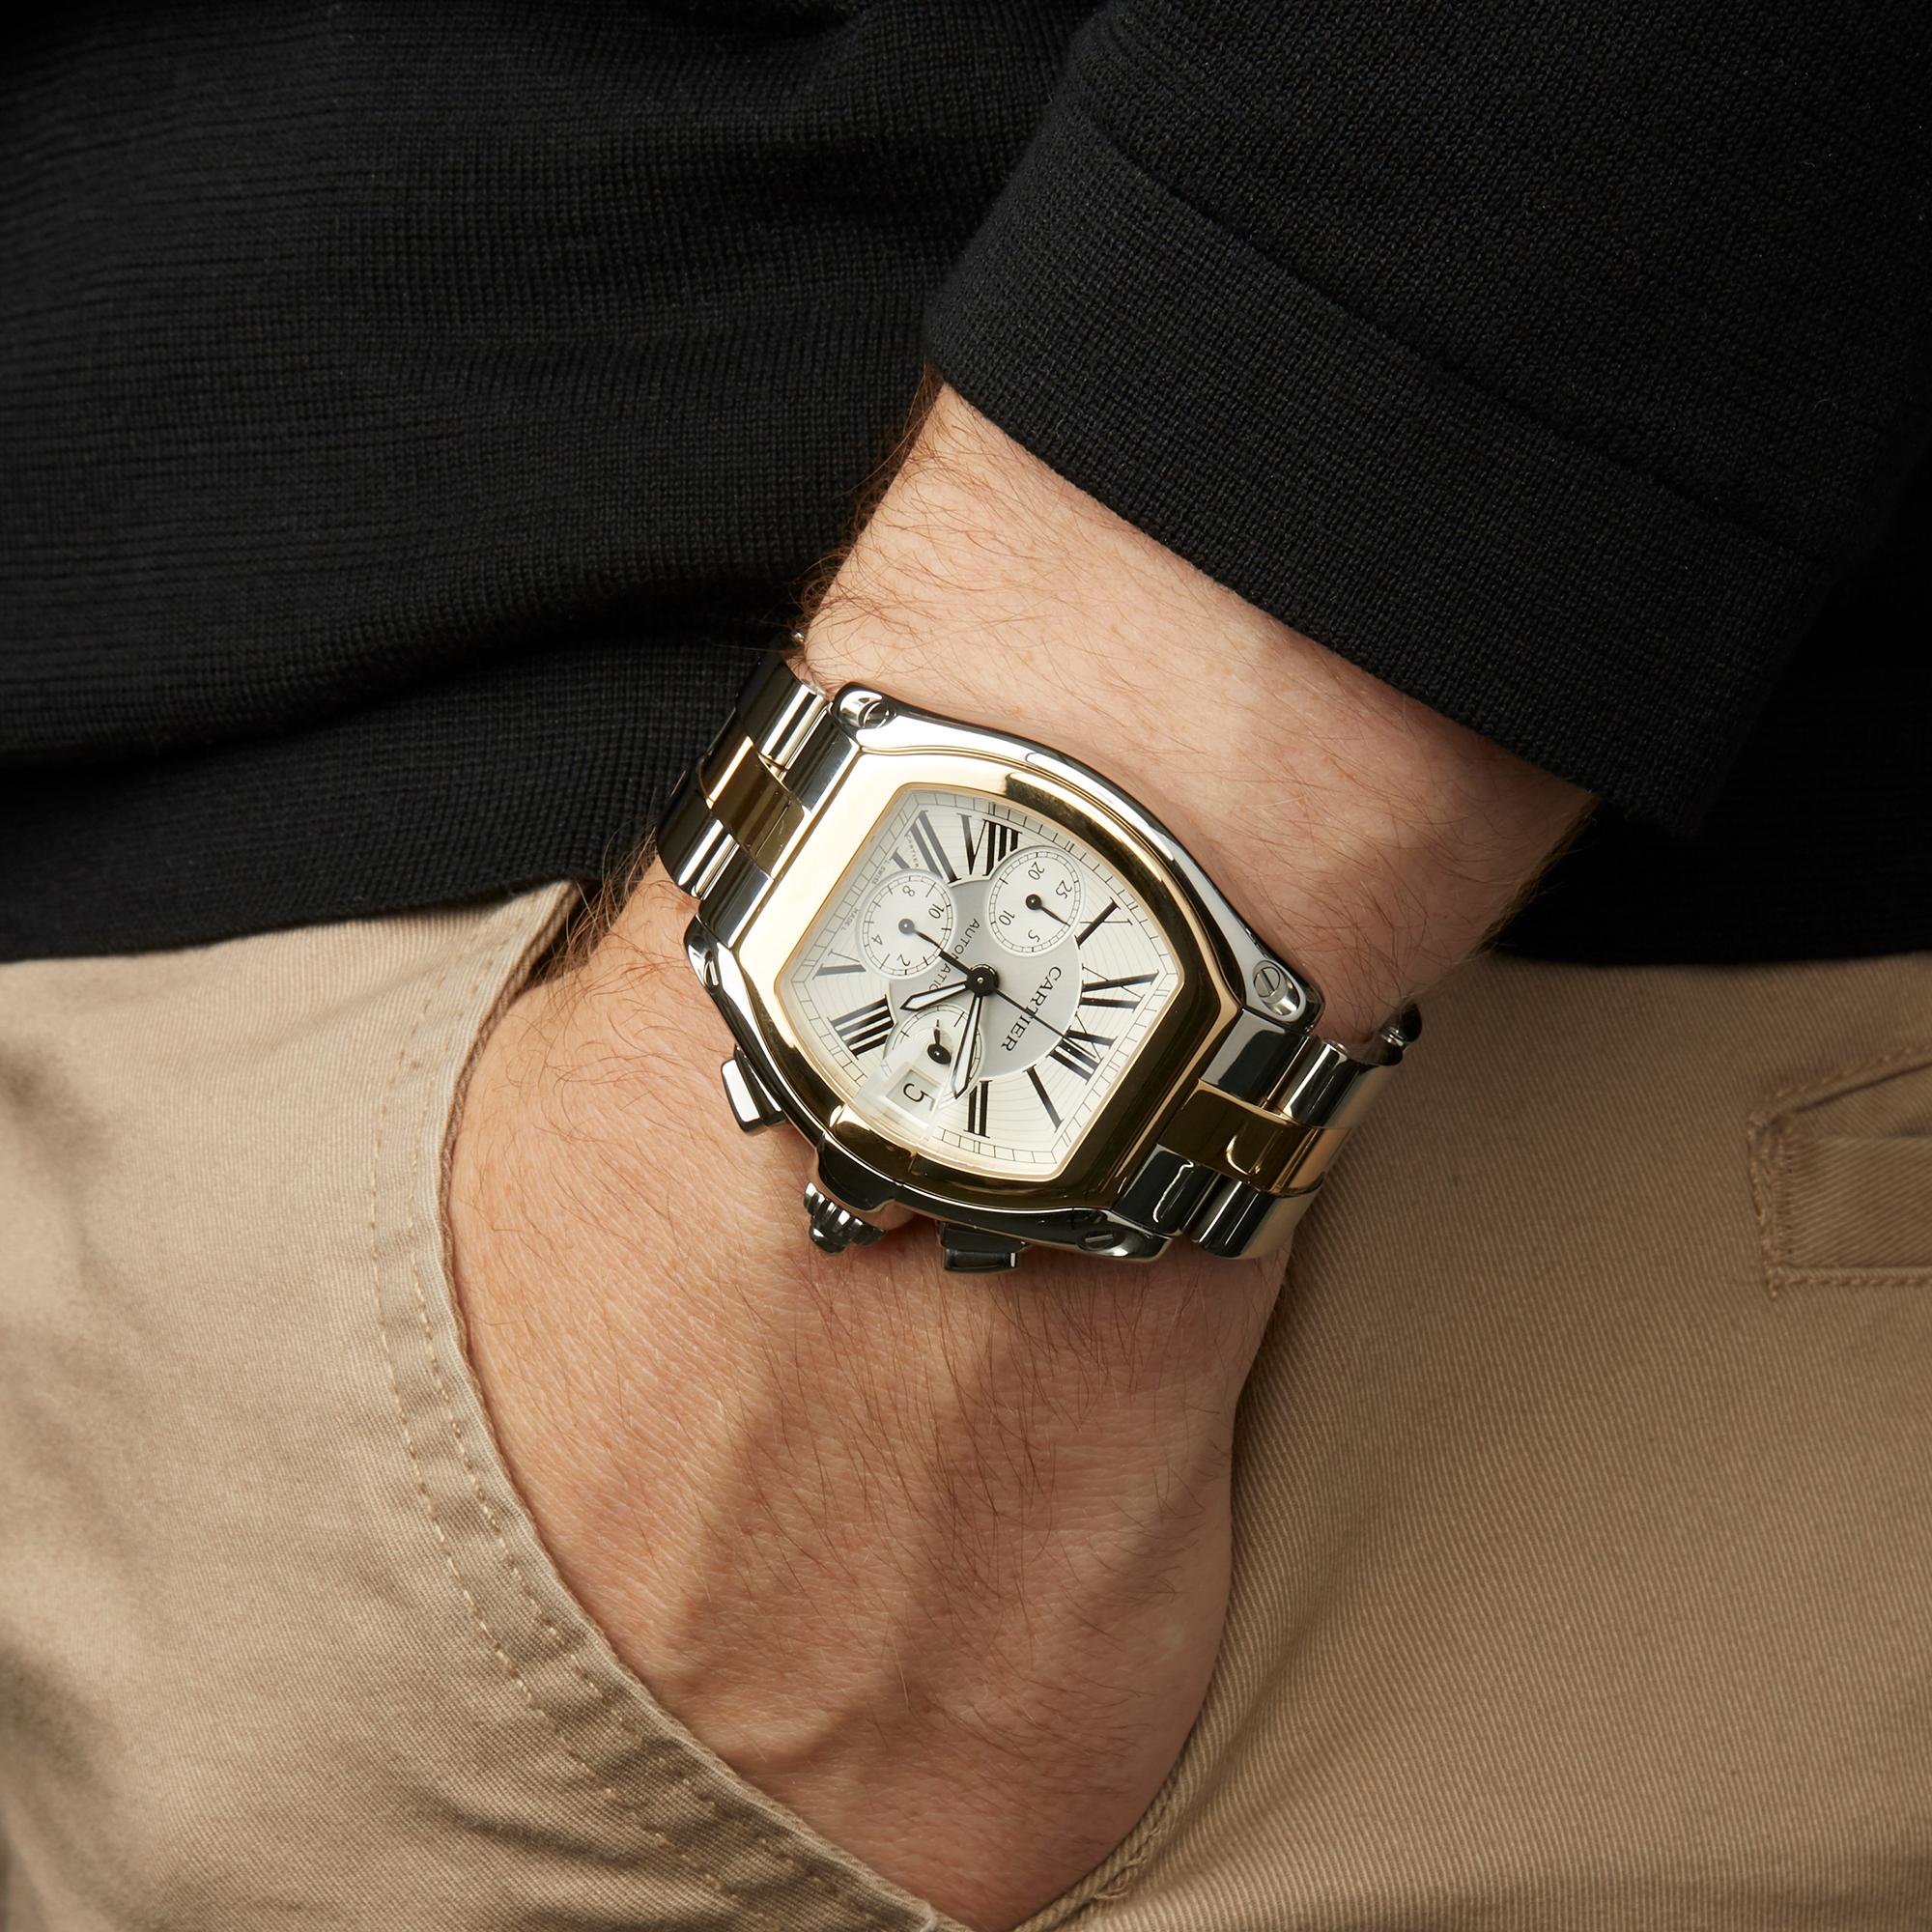 Cartier Roadster XL Chronograph Stainless Steel and Yellow Gold 2618 1